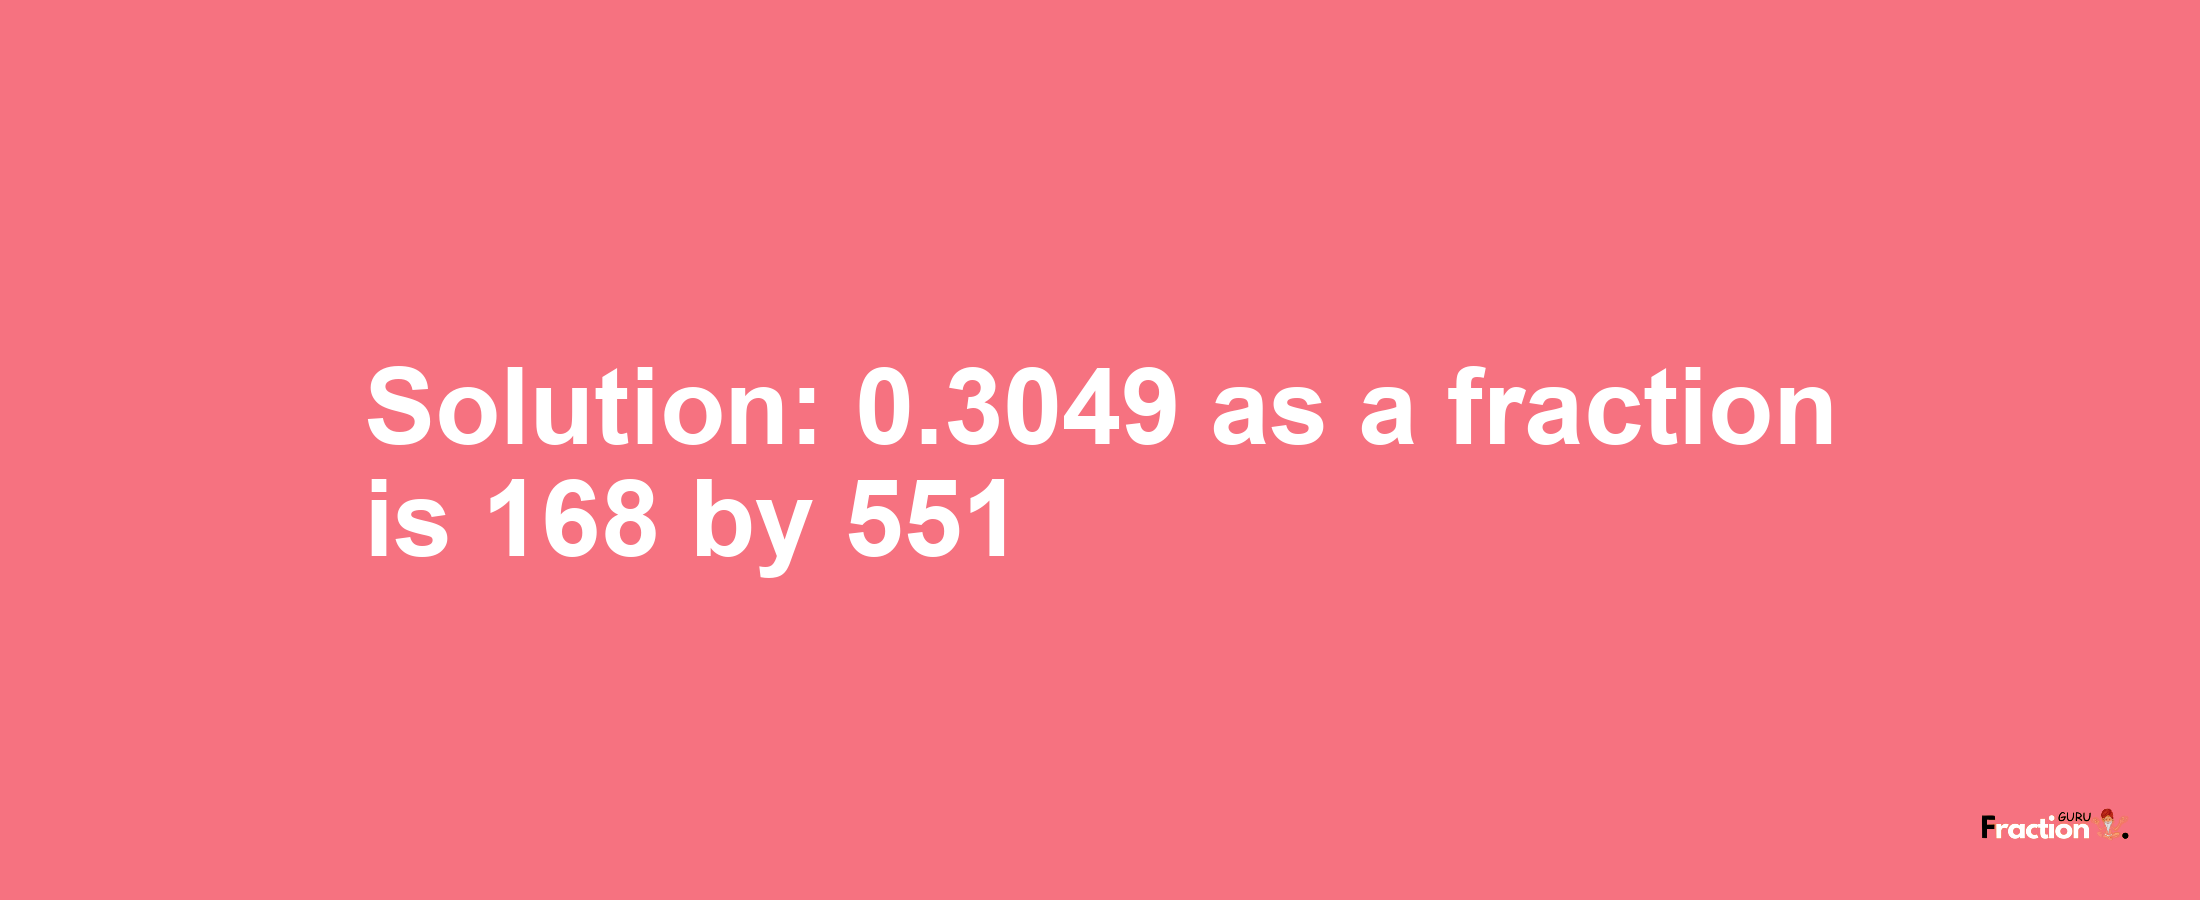 Solution:0.3049 as a fraction is 168/551